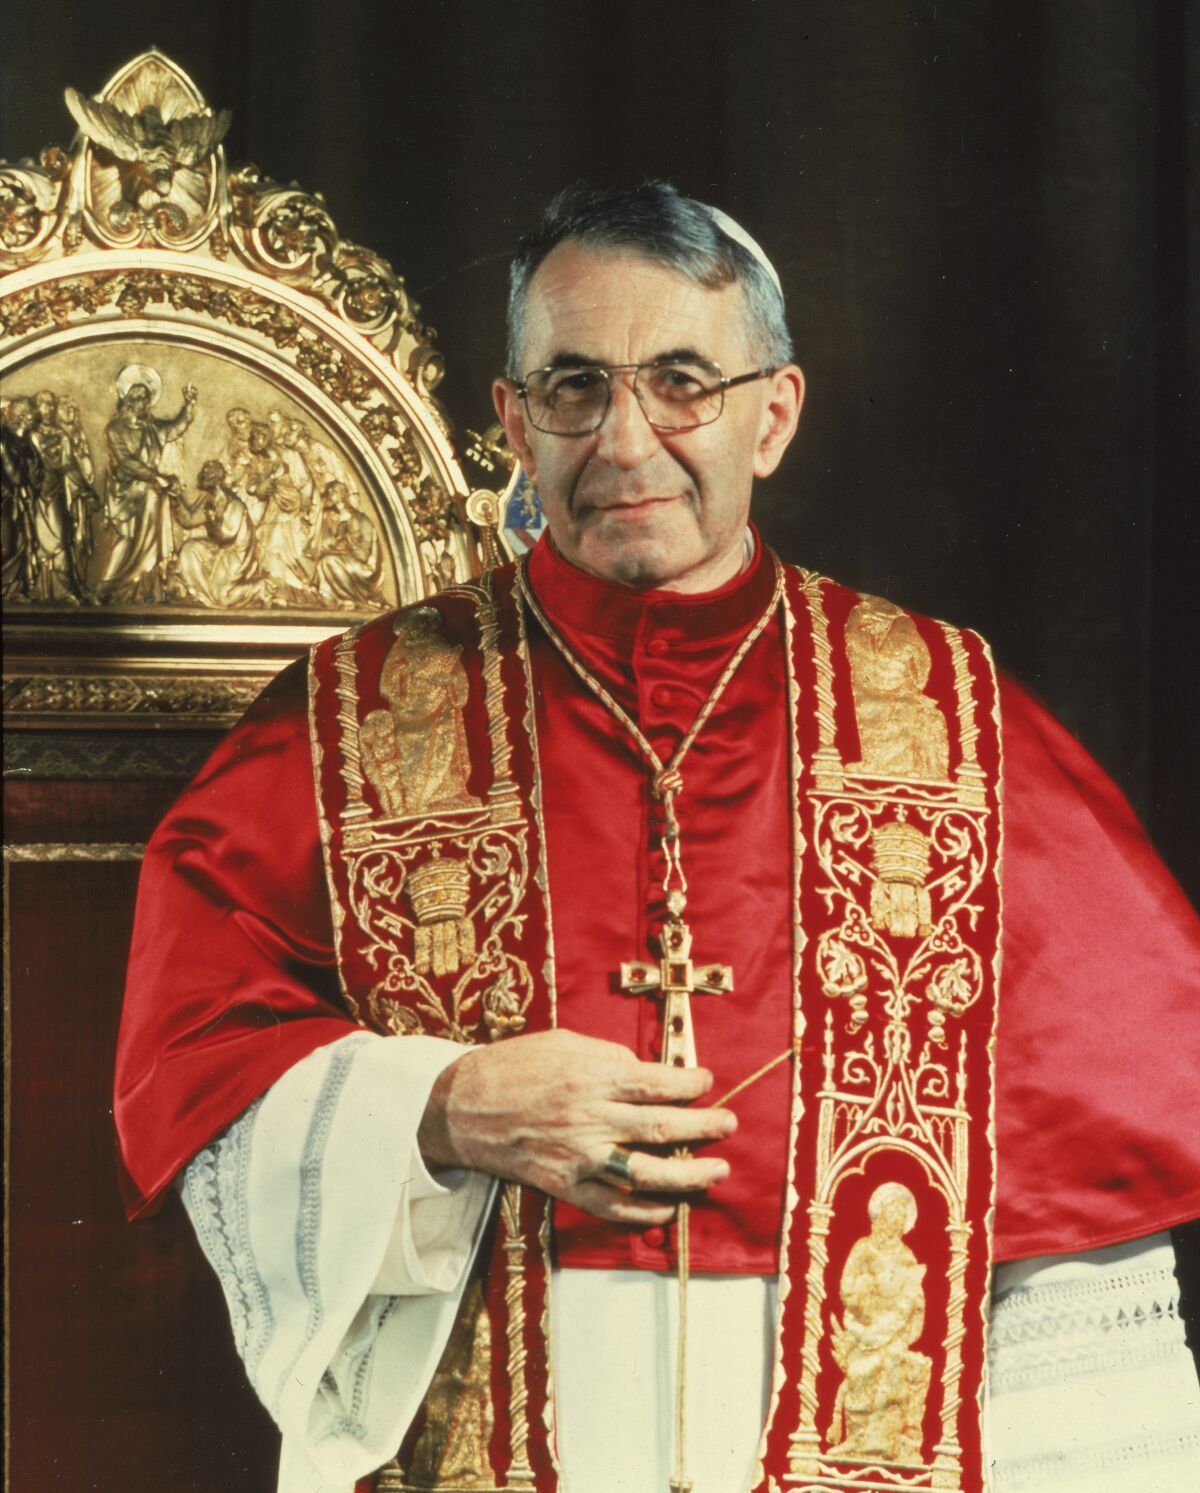 A 1978 photo of Pope John Paul I standing before the papal throne in Vatican City. Pope Francis has approved crediting a miraculous healing to one of his late predecessors, John Paul I. Francis' signing off on the 2011 recovery in Argentina of a child moves John Paul I along the path toward possible sainthood. John Paul was pontiff from Sept. 3 till Sept. 28, 1978, when he was found dead in his bed. (AP Photo)